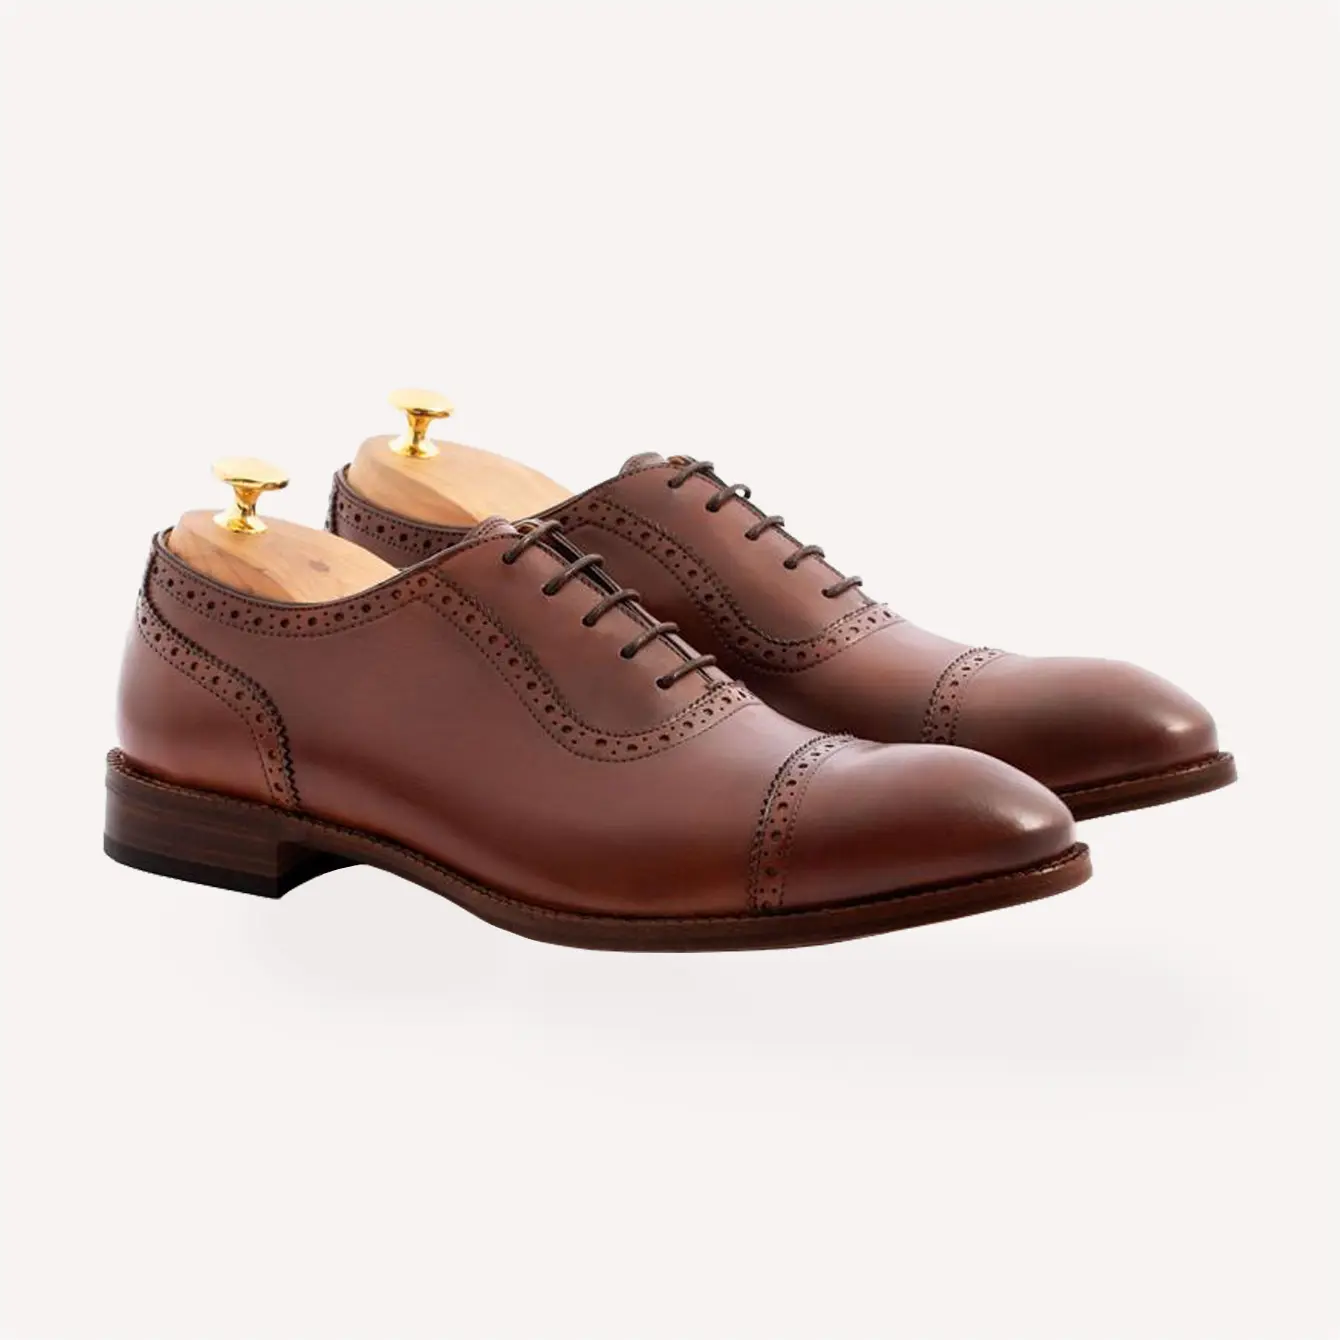 Strengthen Collision course song 12 Best Men's Dress Shoes for Any Budget - The Modest Man